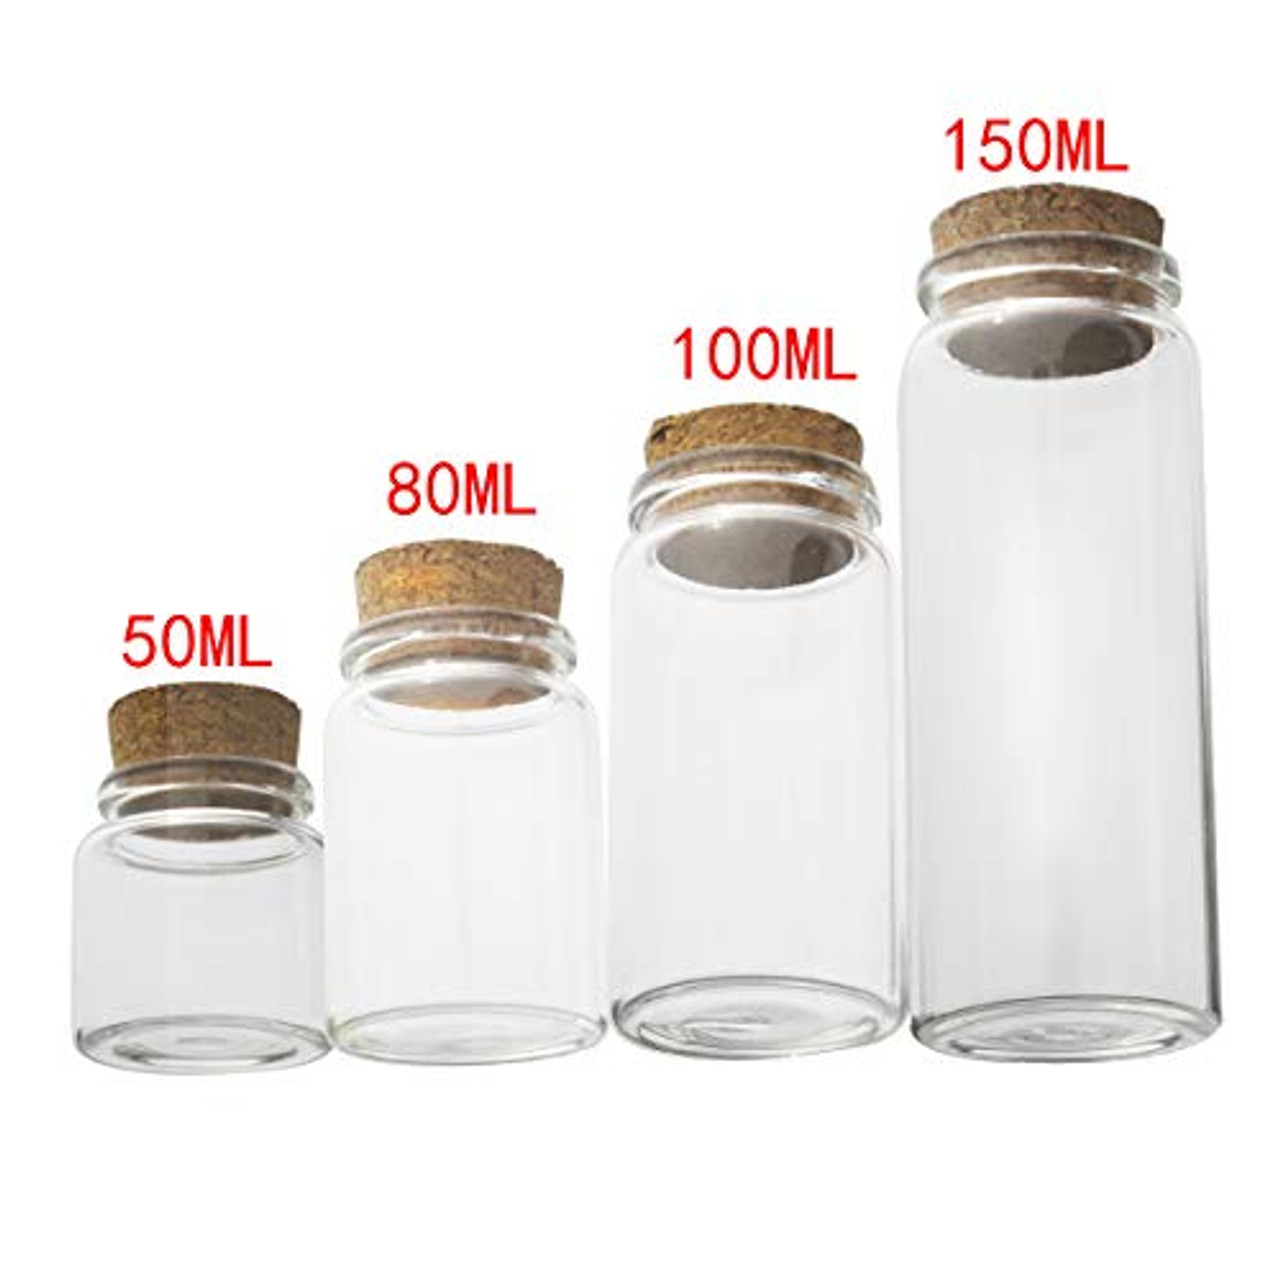 15 Pack Small Glass Bottles with Cork Stoppers - 1.7 oz (50ml